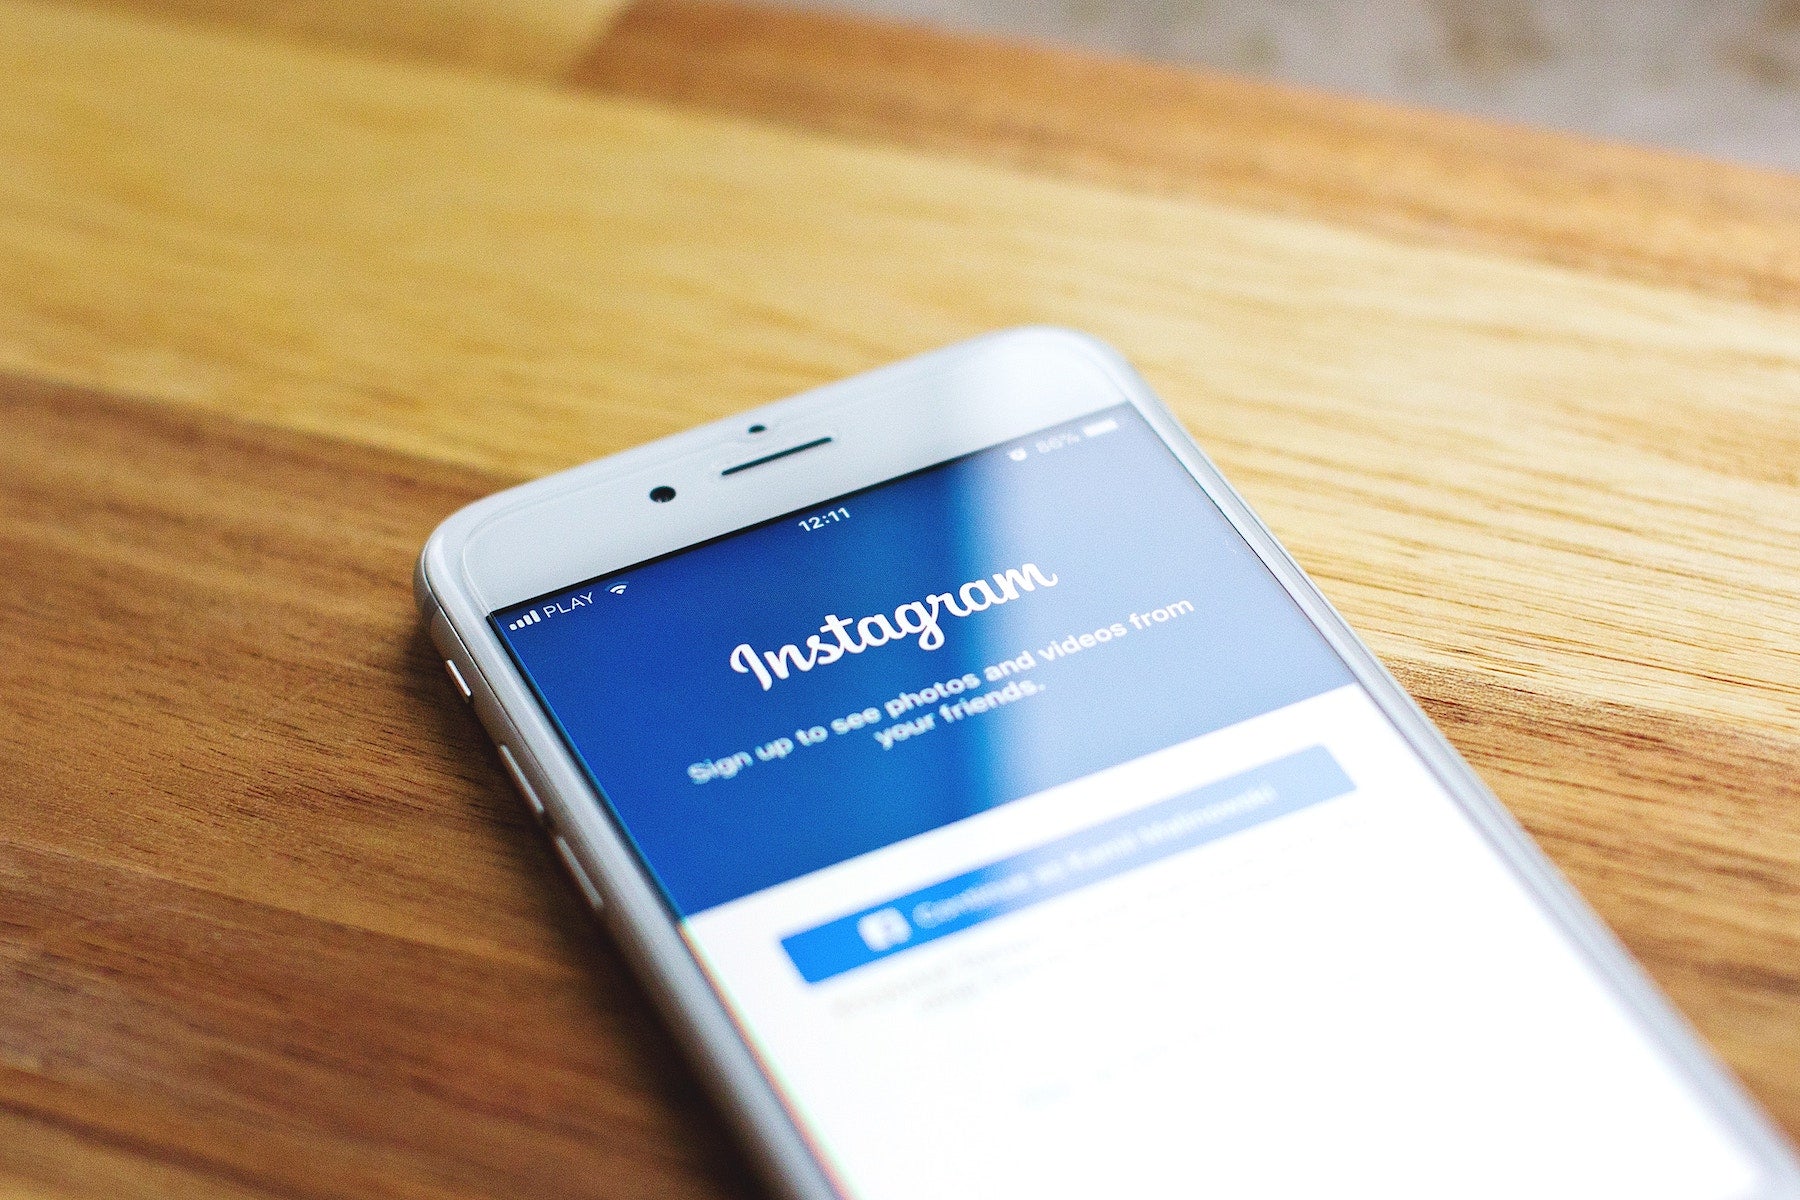 How to Use Instagram Giveaways to Grow Your Following